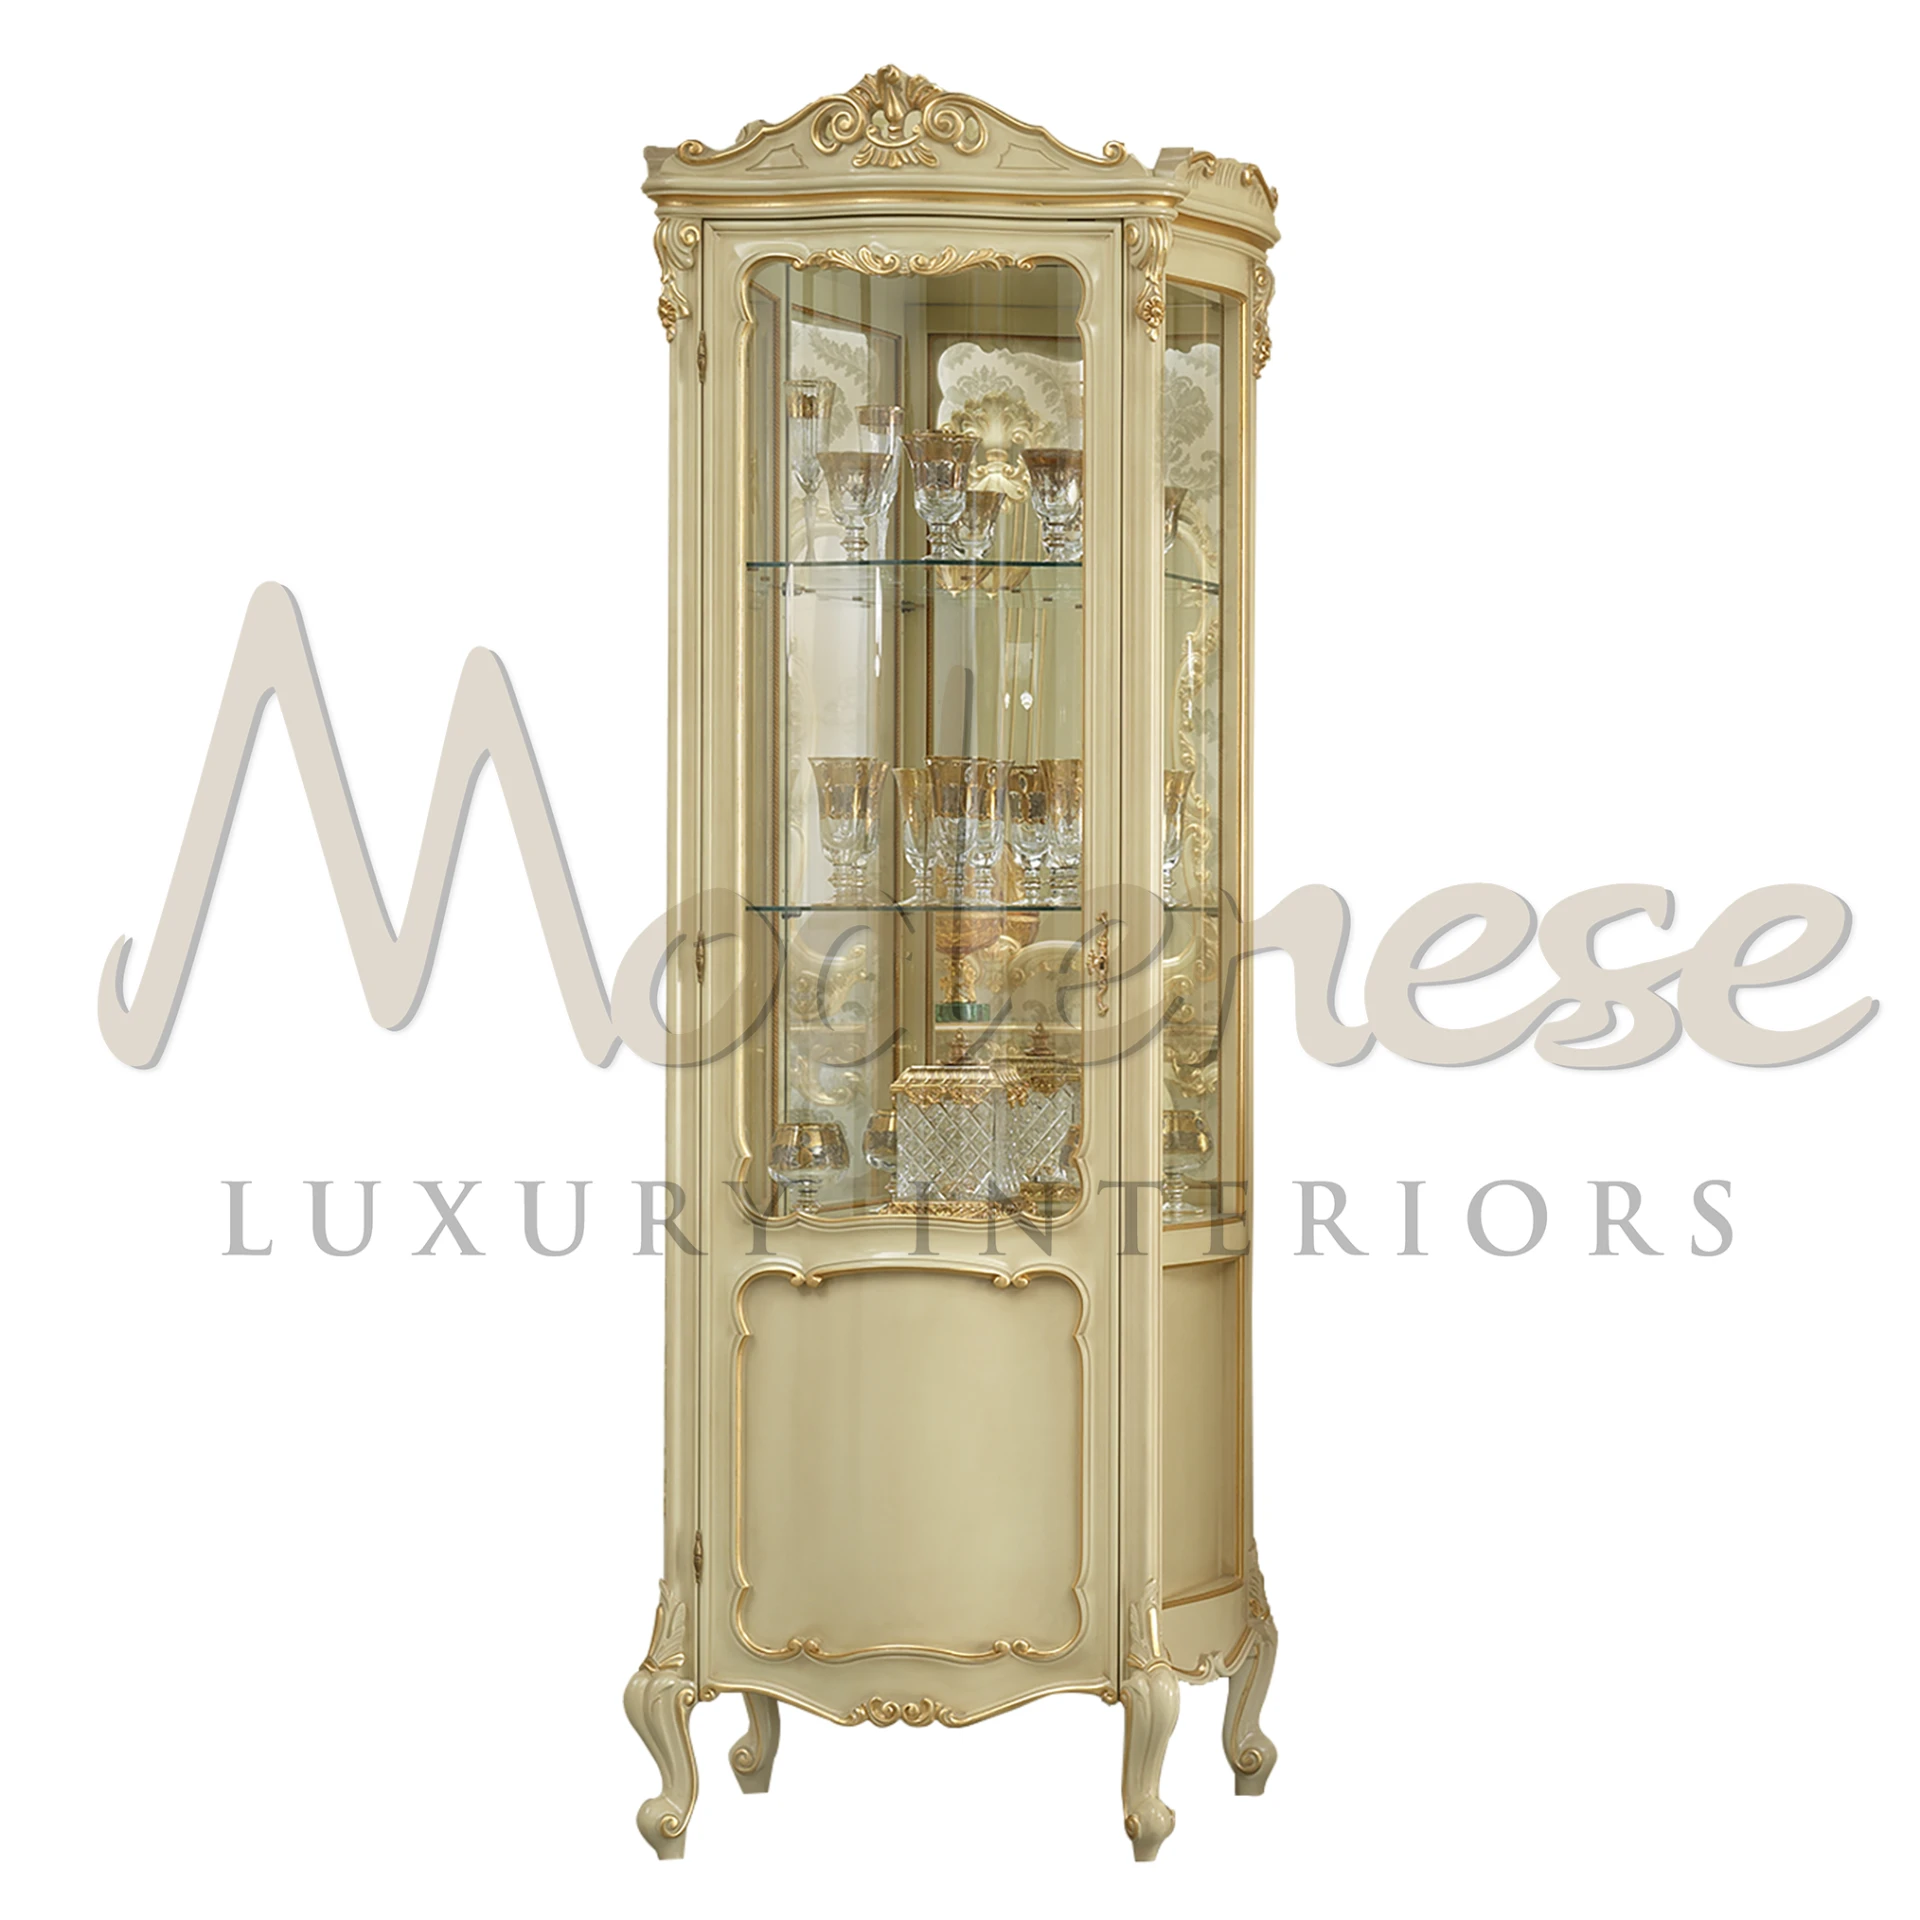 Baroque style luxury Noble one door glass cabinet with exquisite carvings